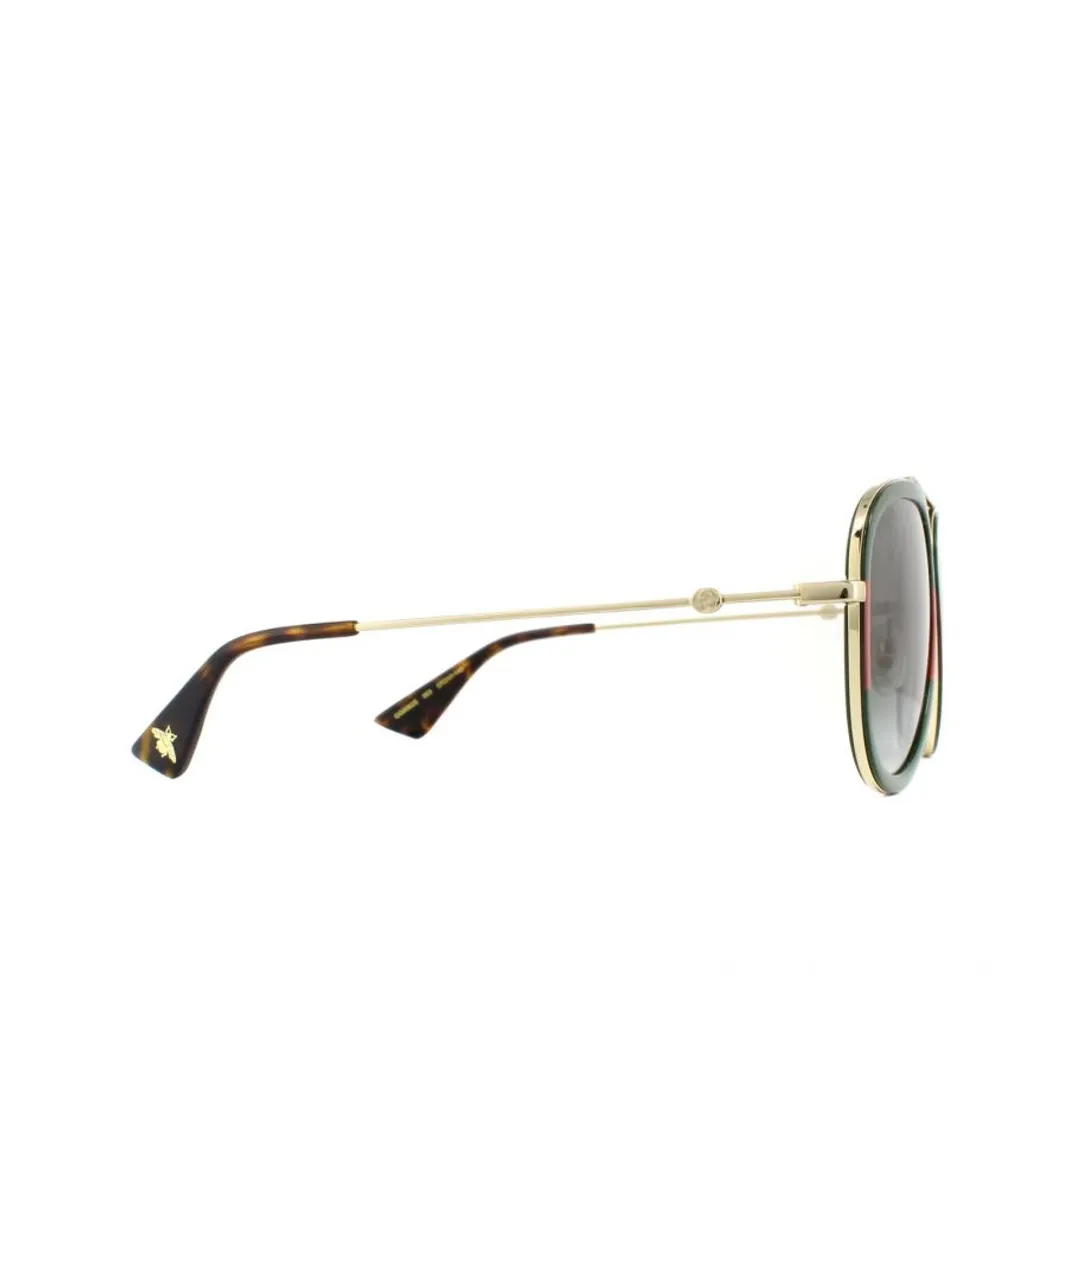 Gucci Unisex Sunglasses GG0062S 003 Gold Green Red Gradient Metal - One